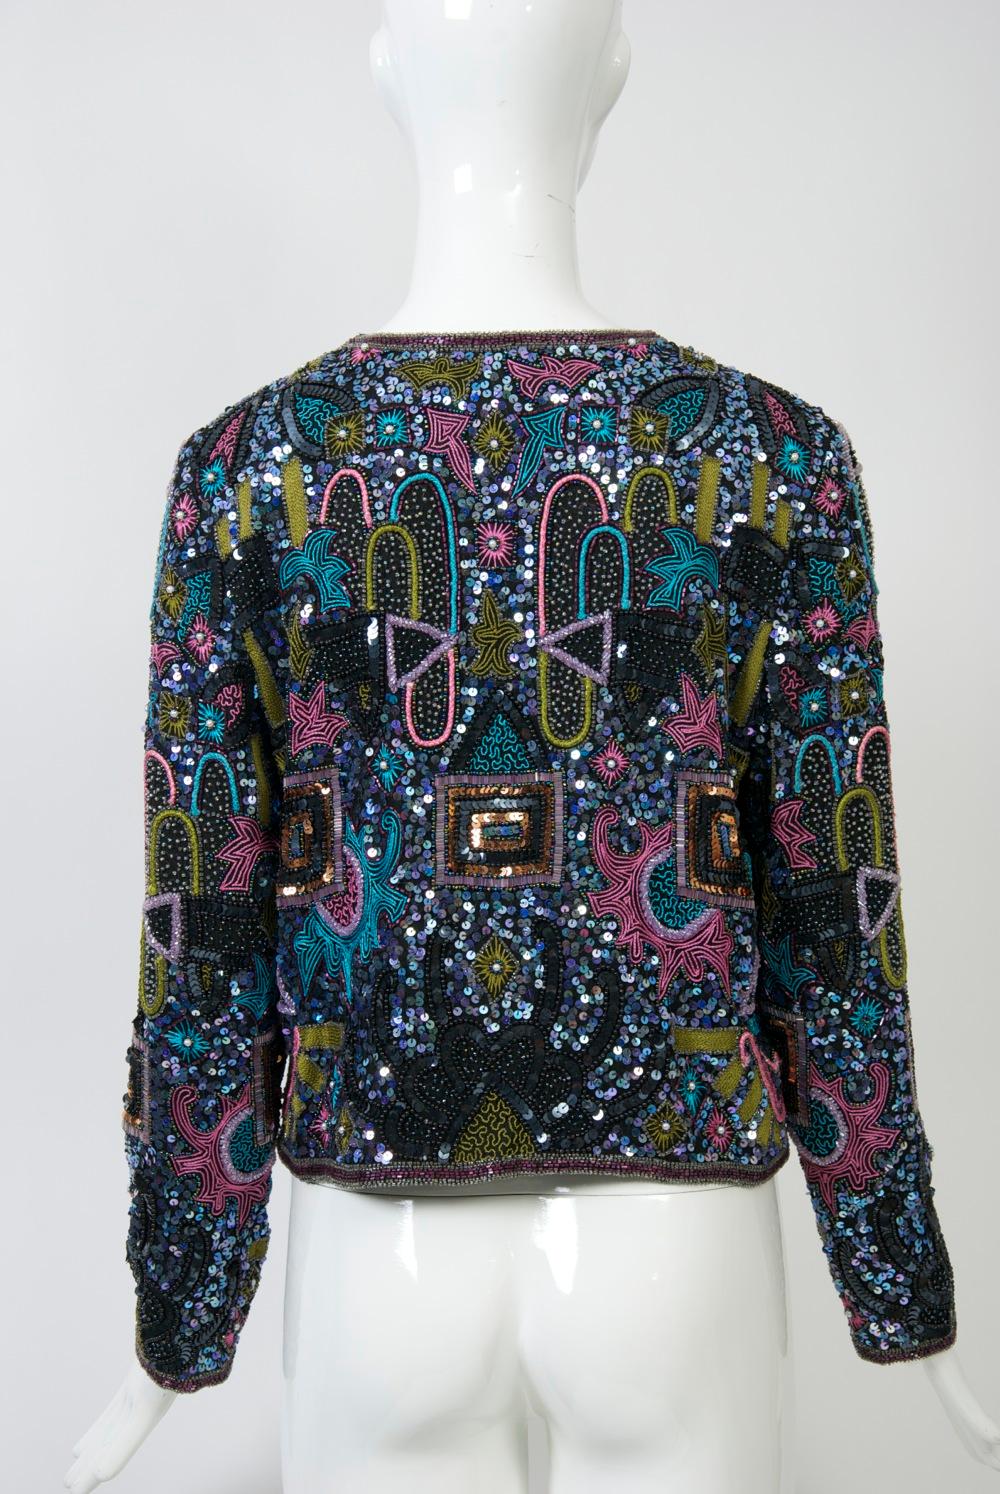 Multicolored Geometric Beaded Evening Jacket In Good Condition For Sale In Alford, MA